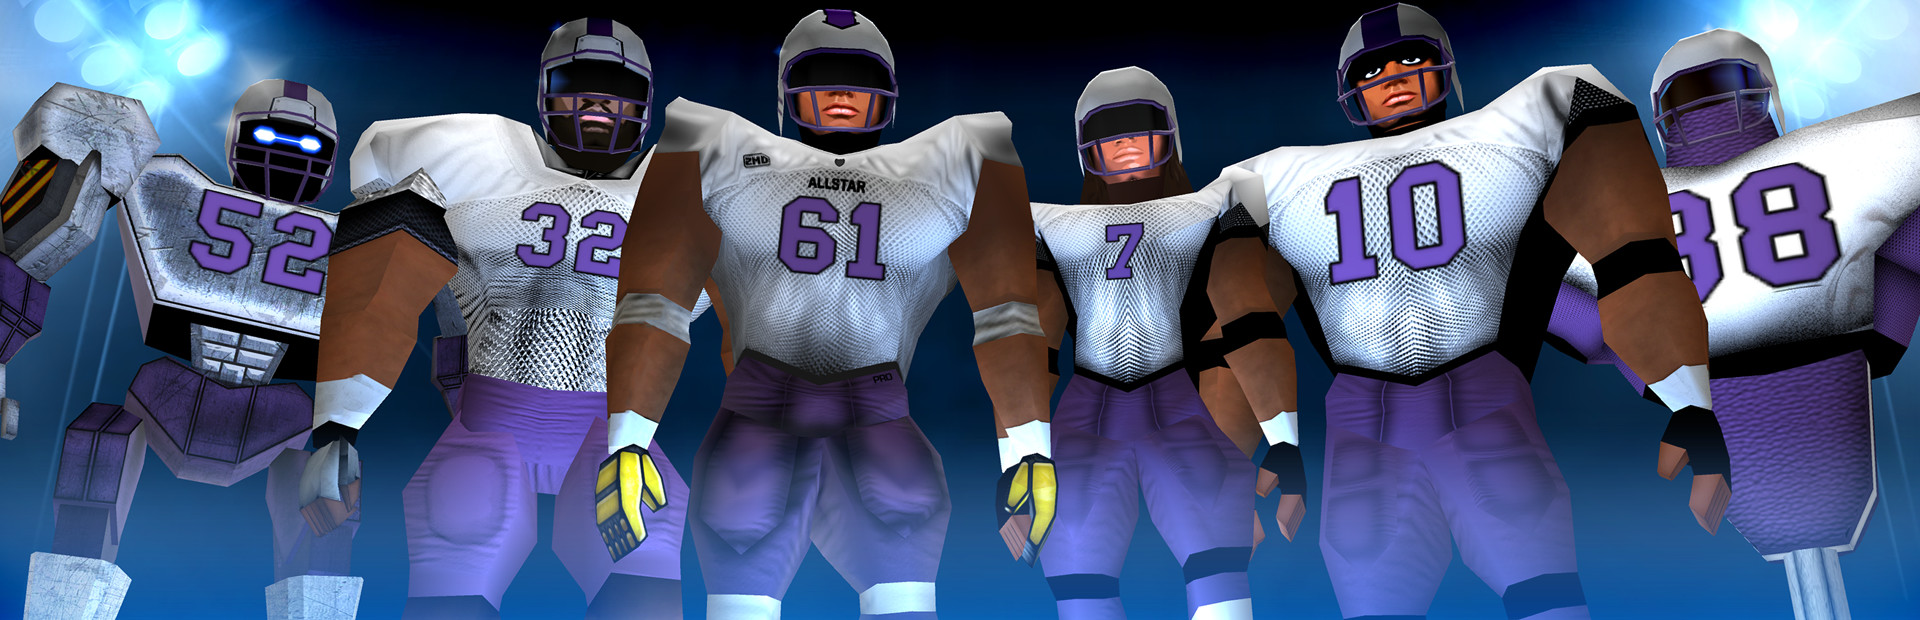 2MD:VR Football Unleashed ALL✰STAR cover image